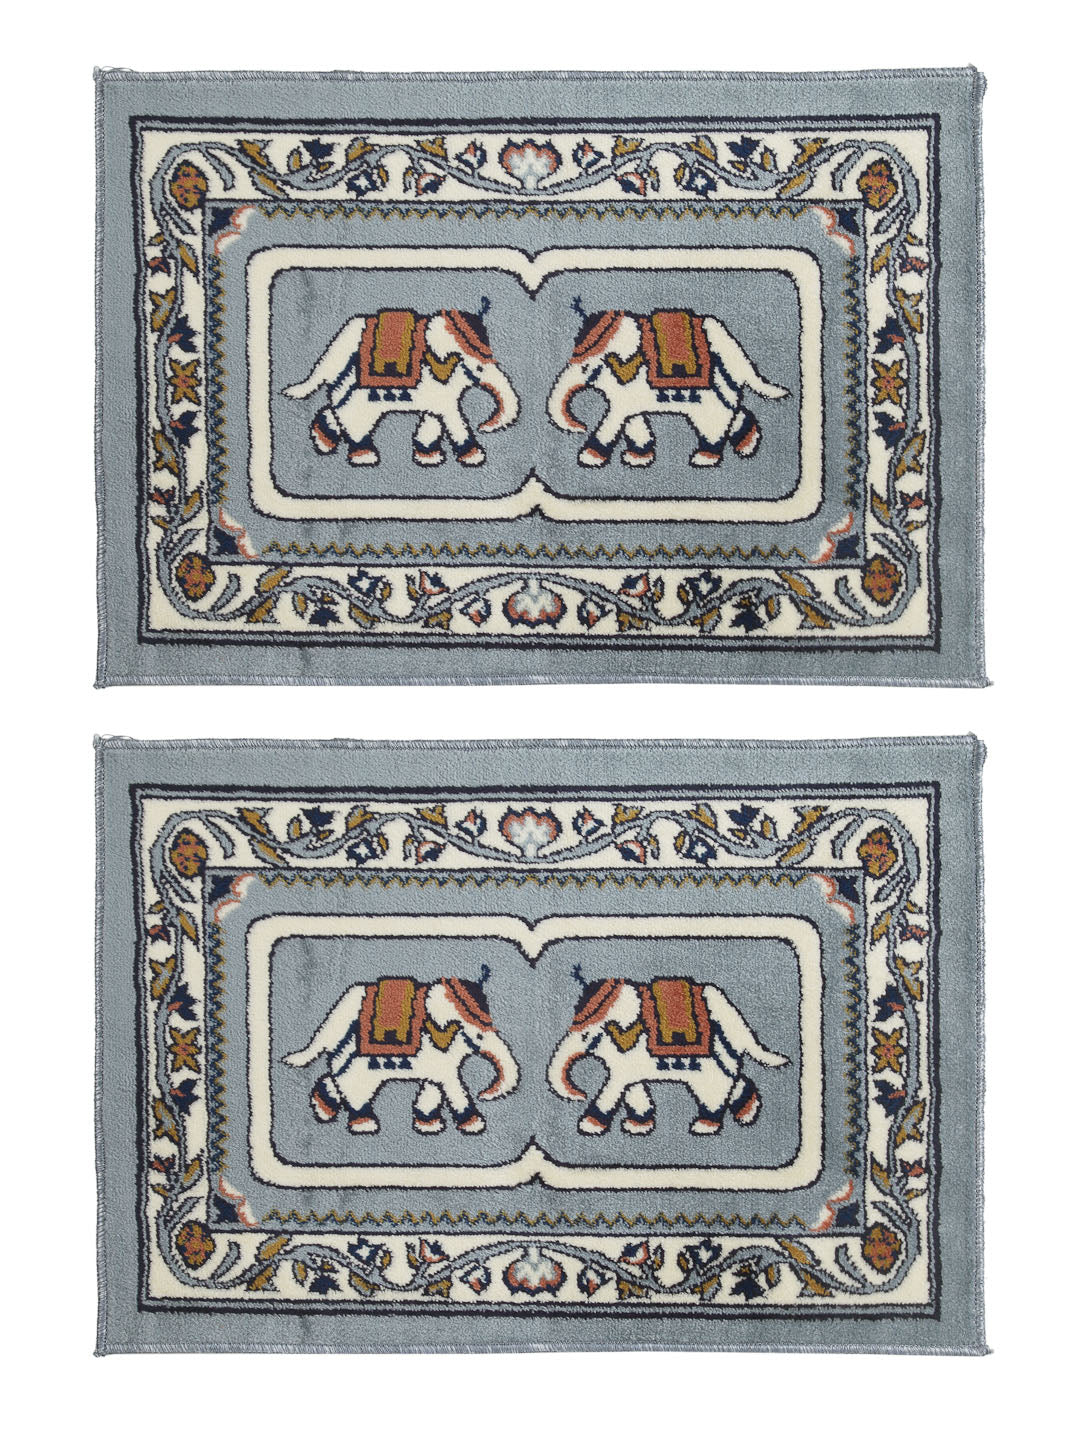 Arrabi Blue Indian Synthetic Full Size Floor Mat (60 X 40 cm) (Pack of 2)